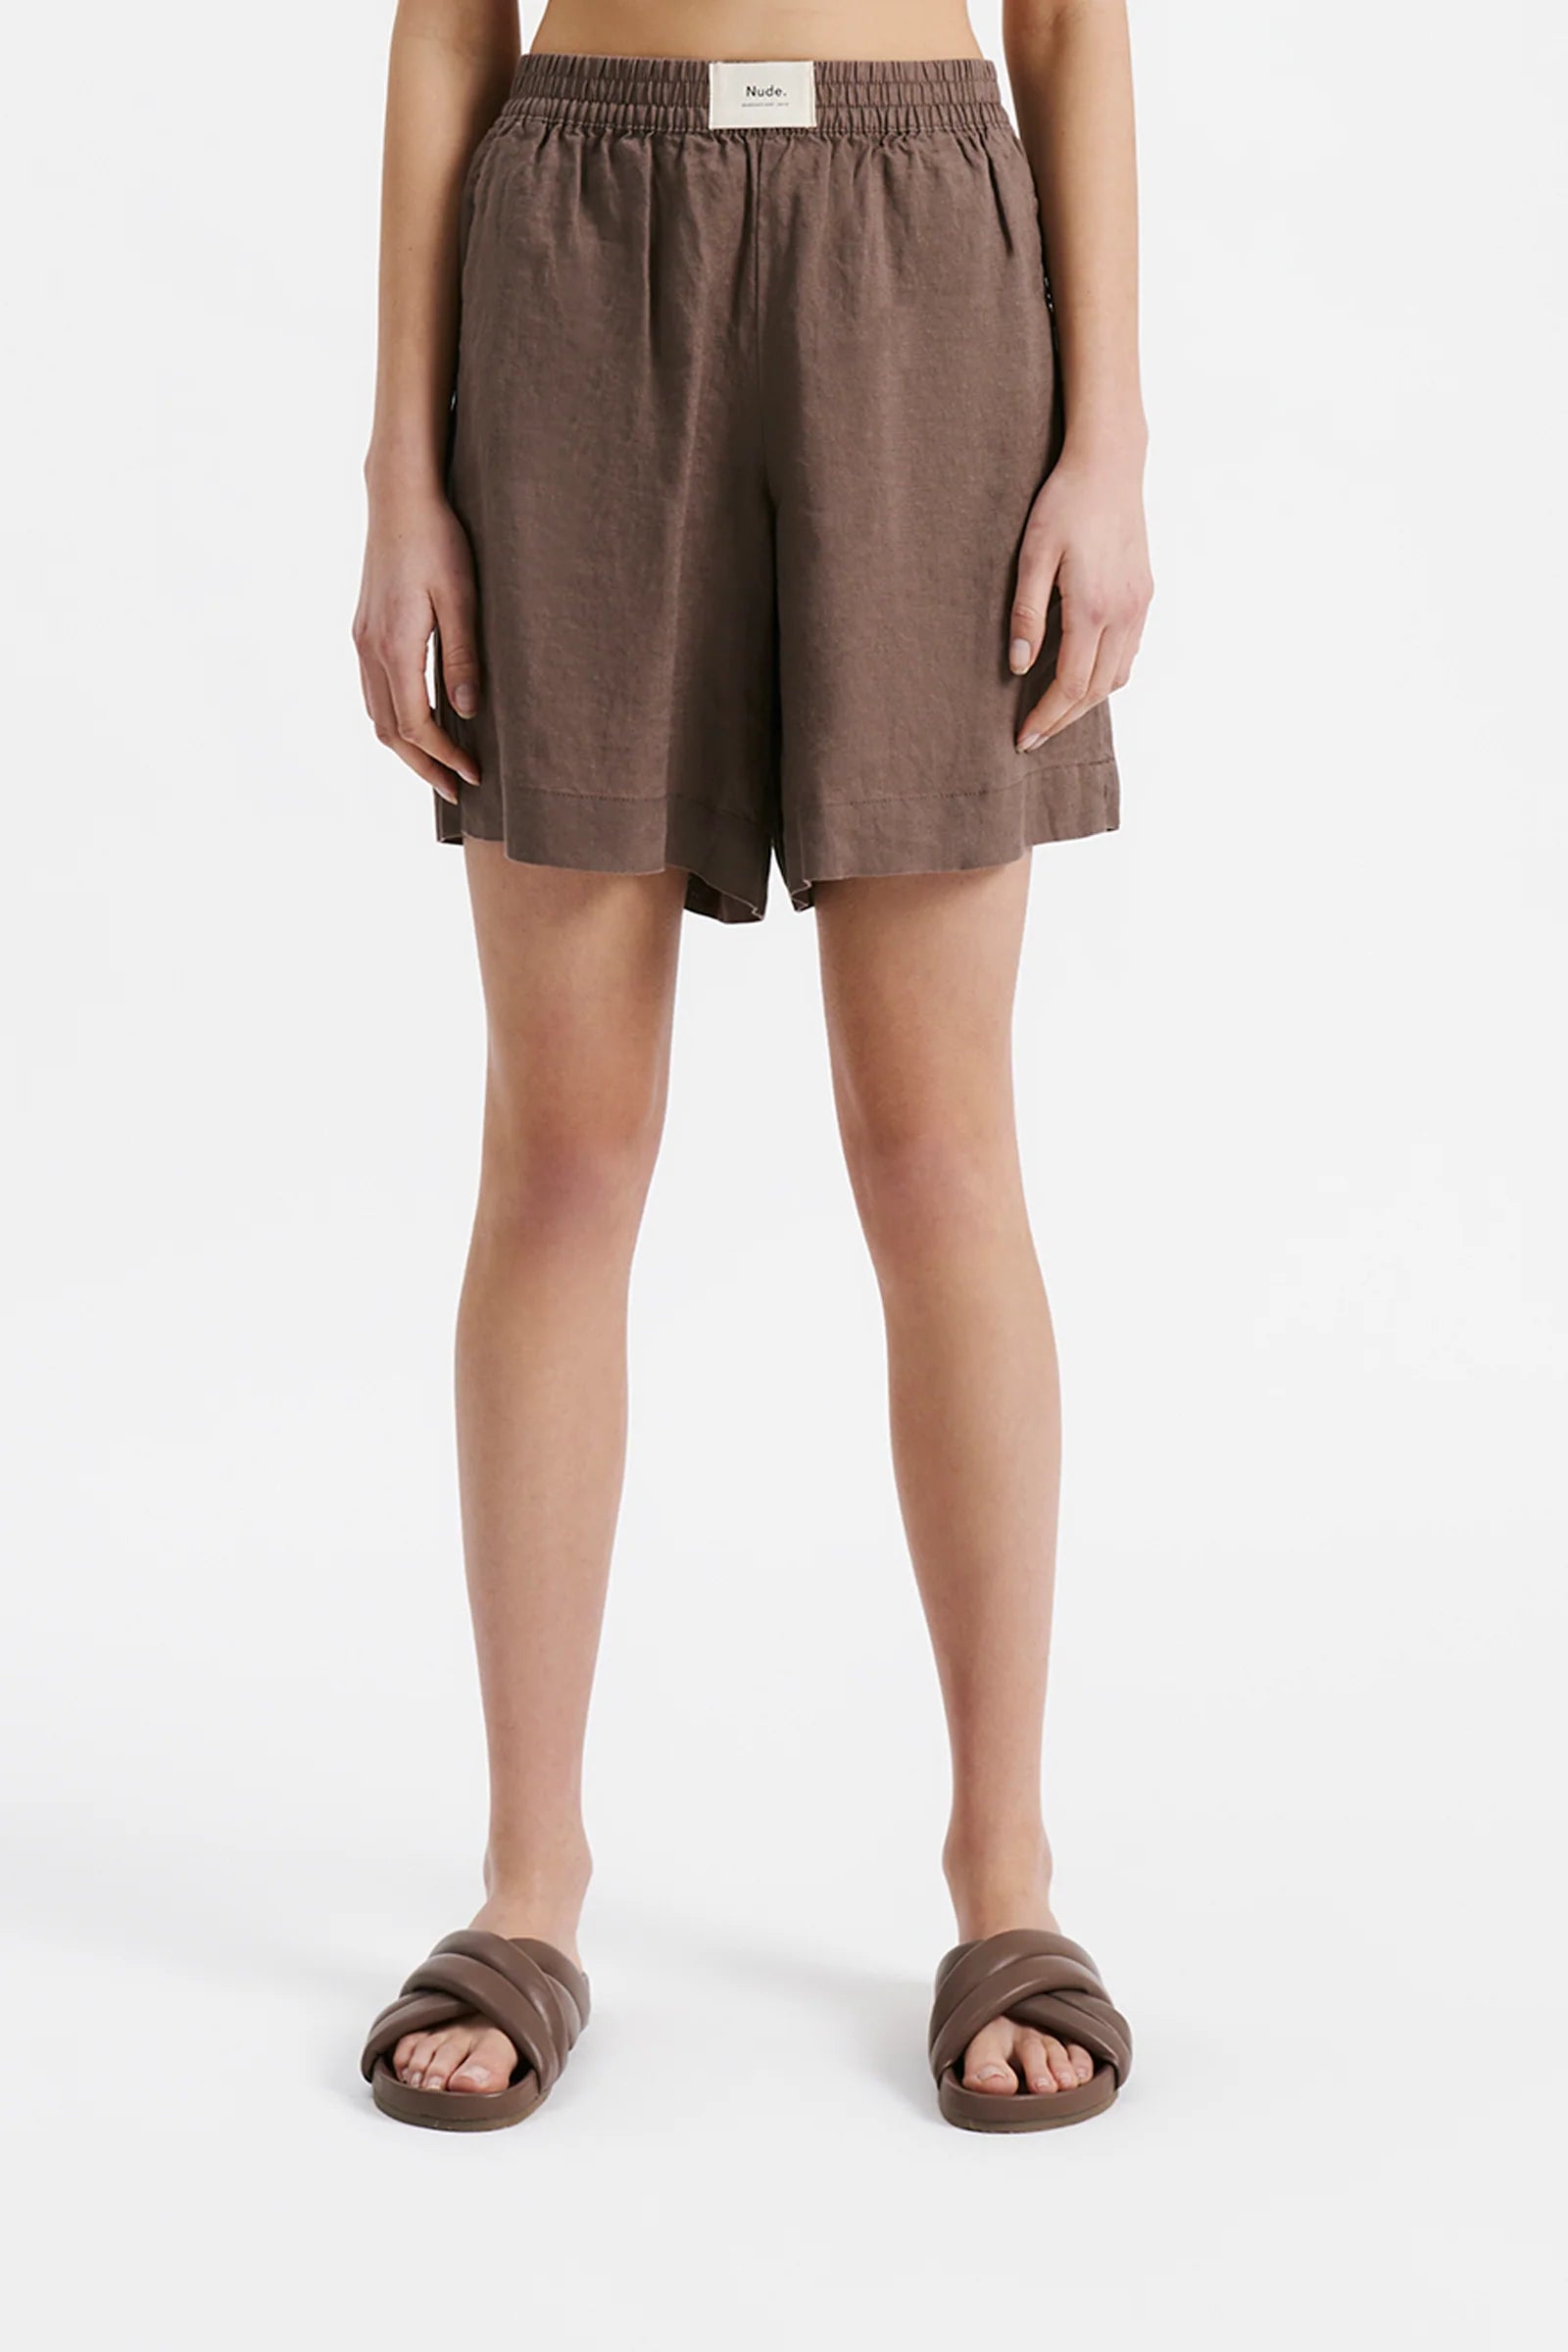 Nude Lucy Lounge Heritage Linen Short Soot